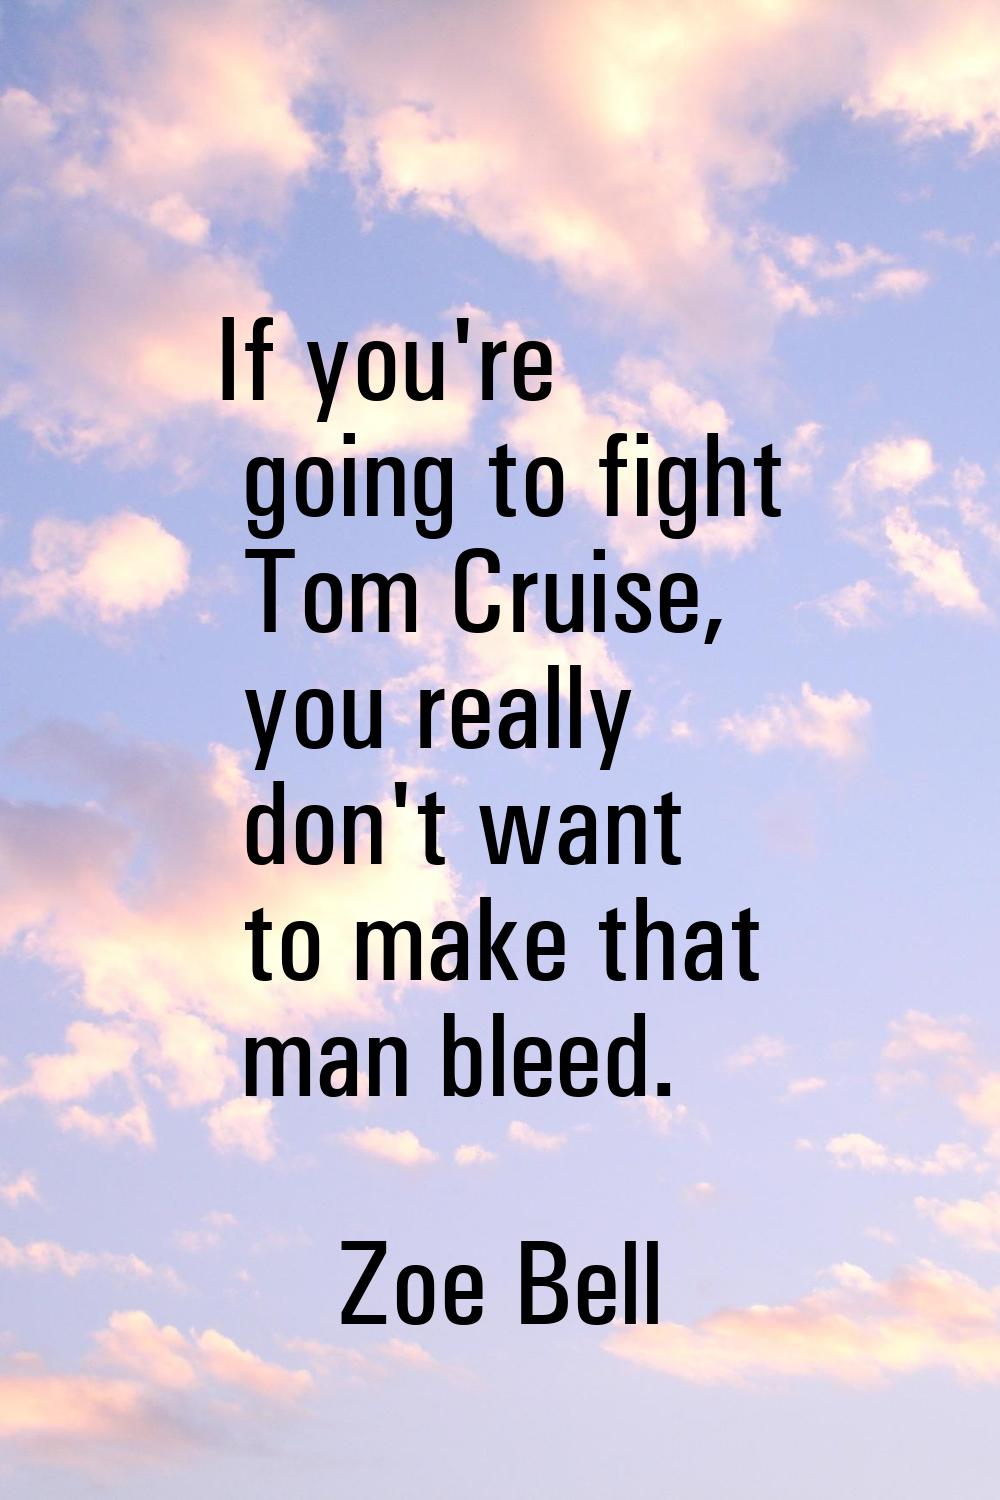 If you're going to fight Tom Cruise, you really don't want to make that man bleed.